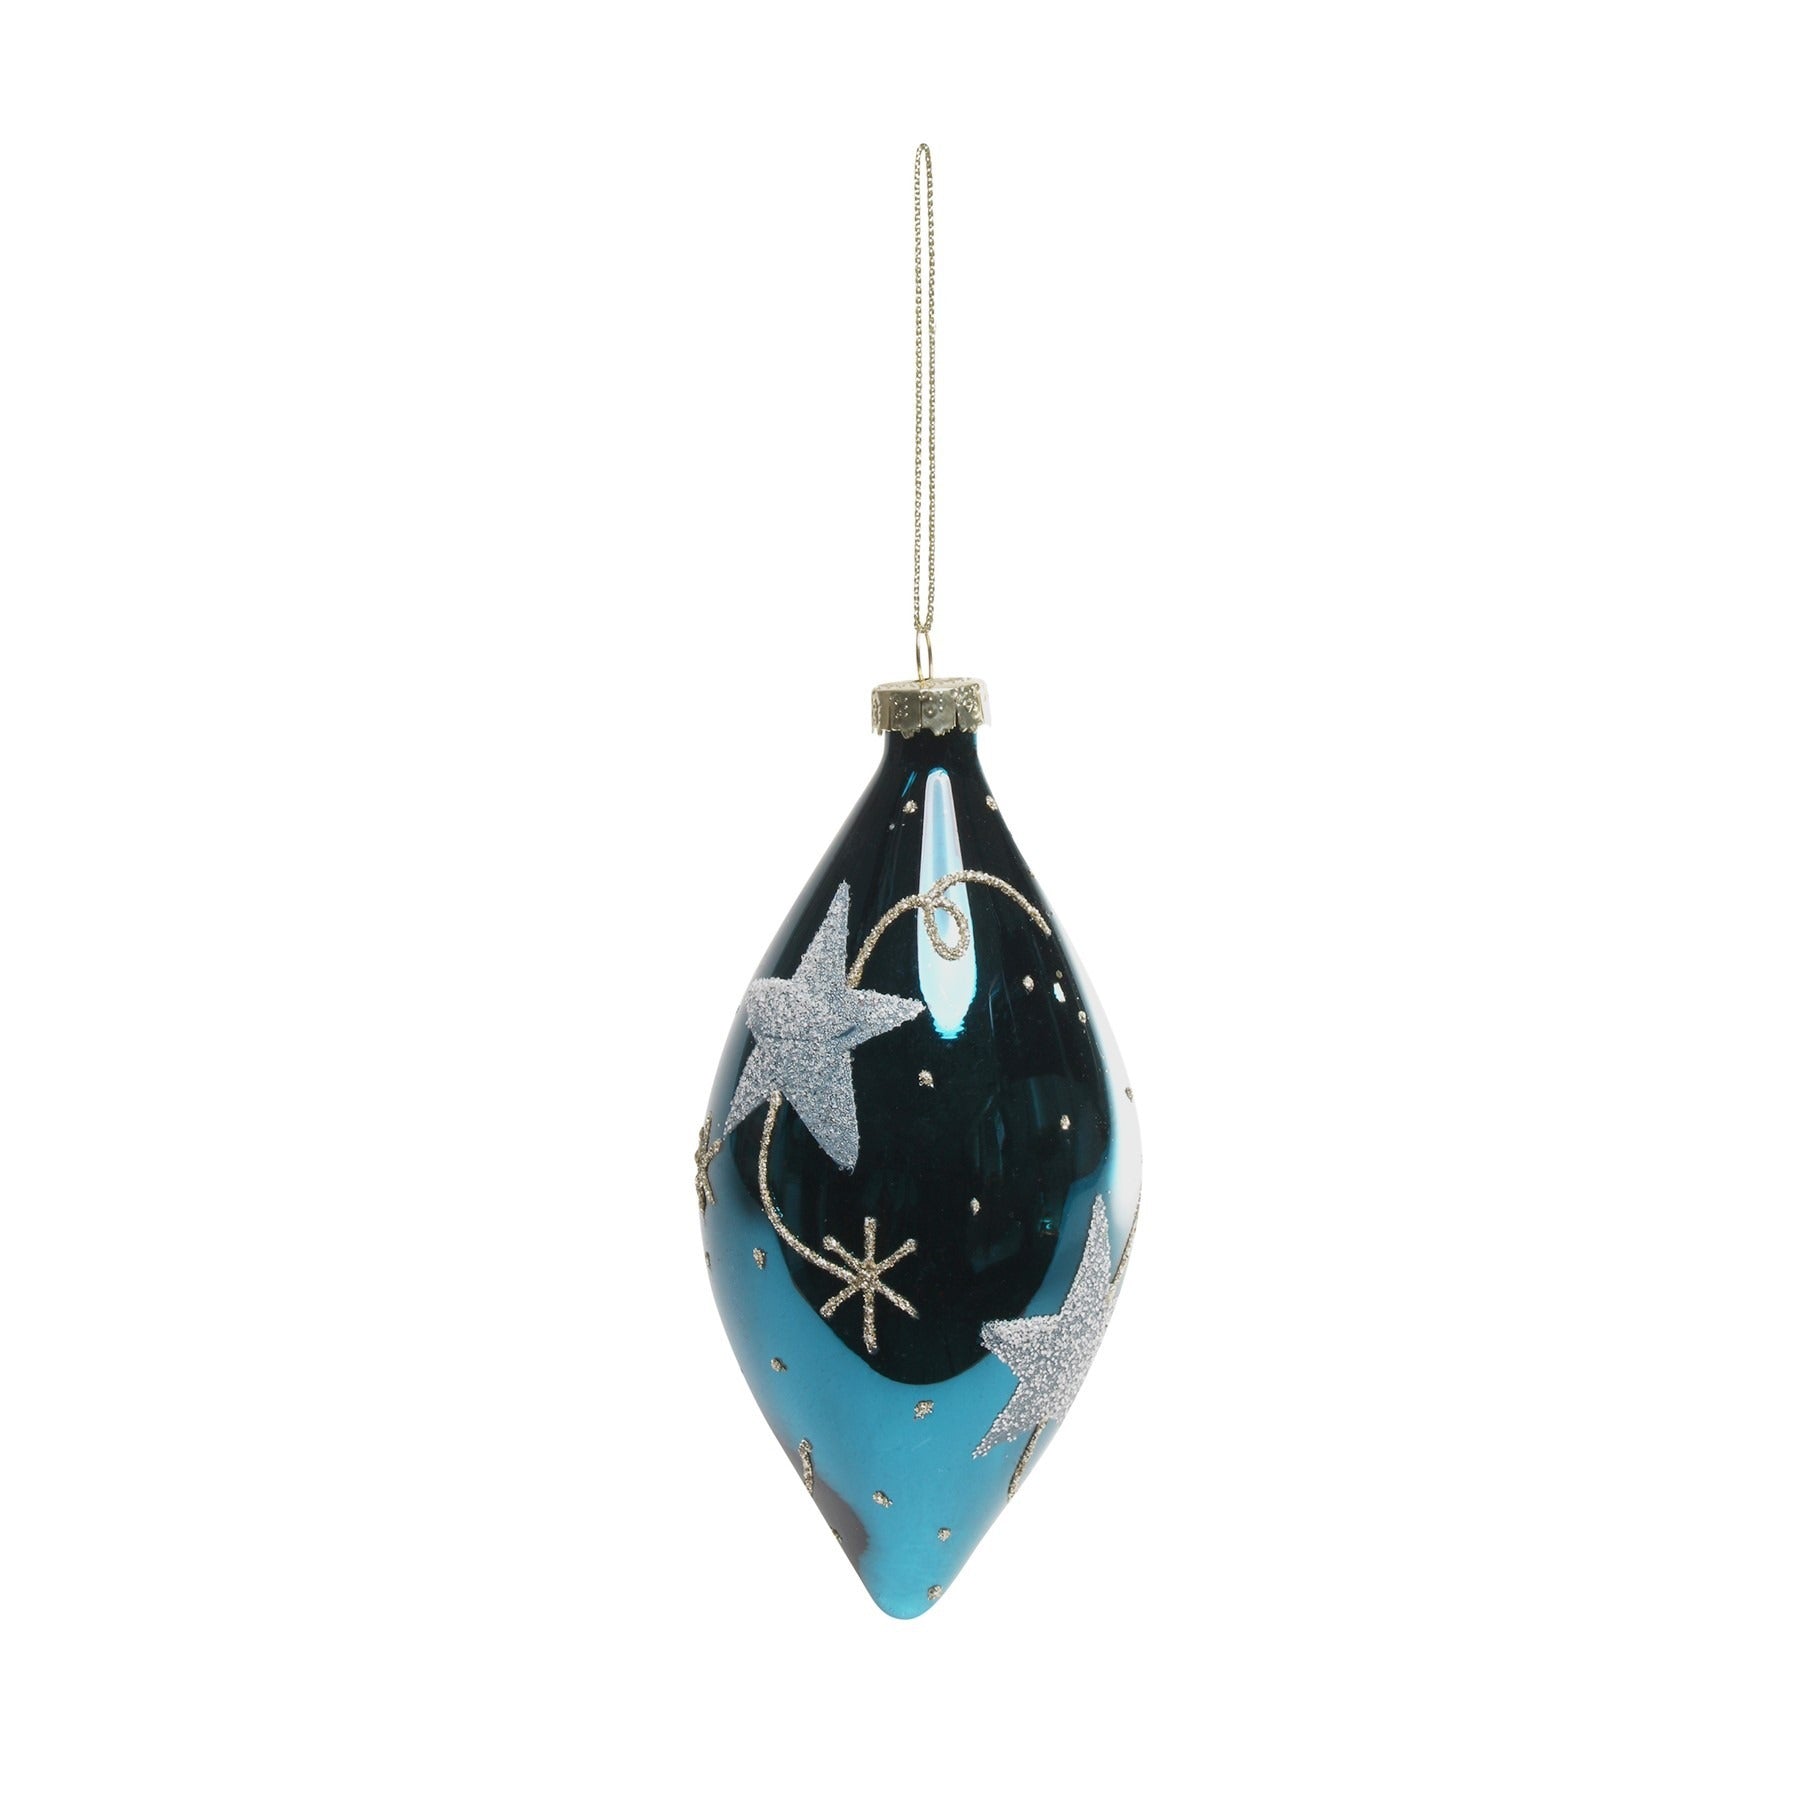 View Midnight Blue Glass Droplet Bauble H12cm information